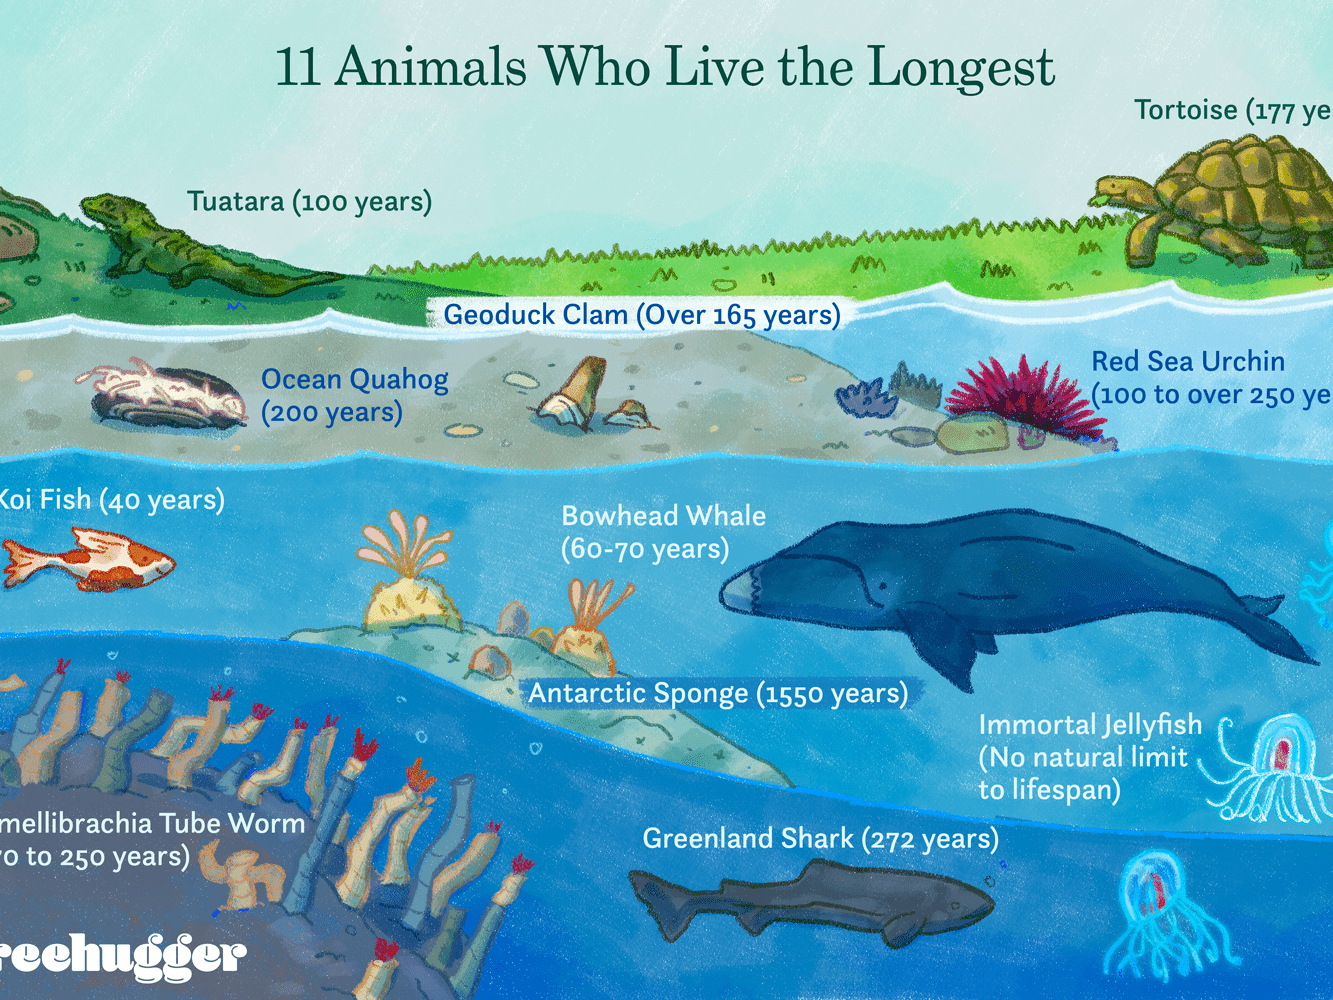 What animal has lived the longest life?